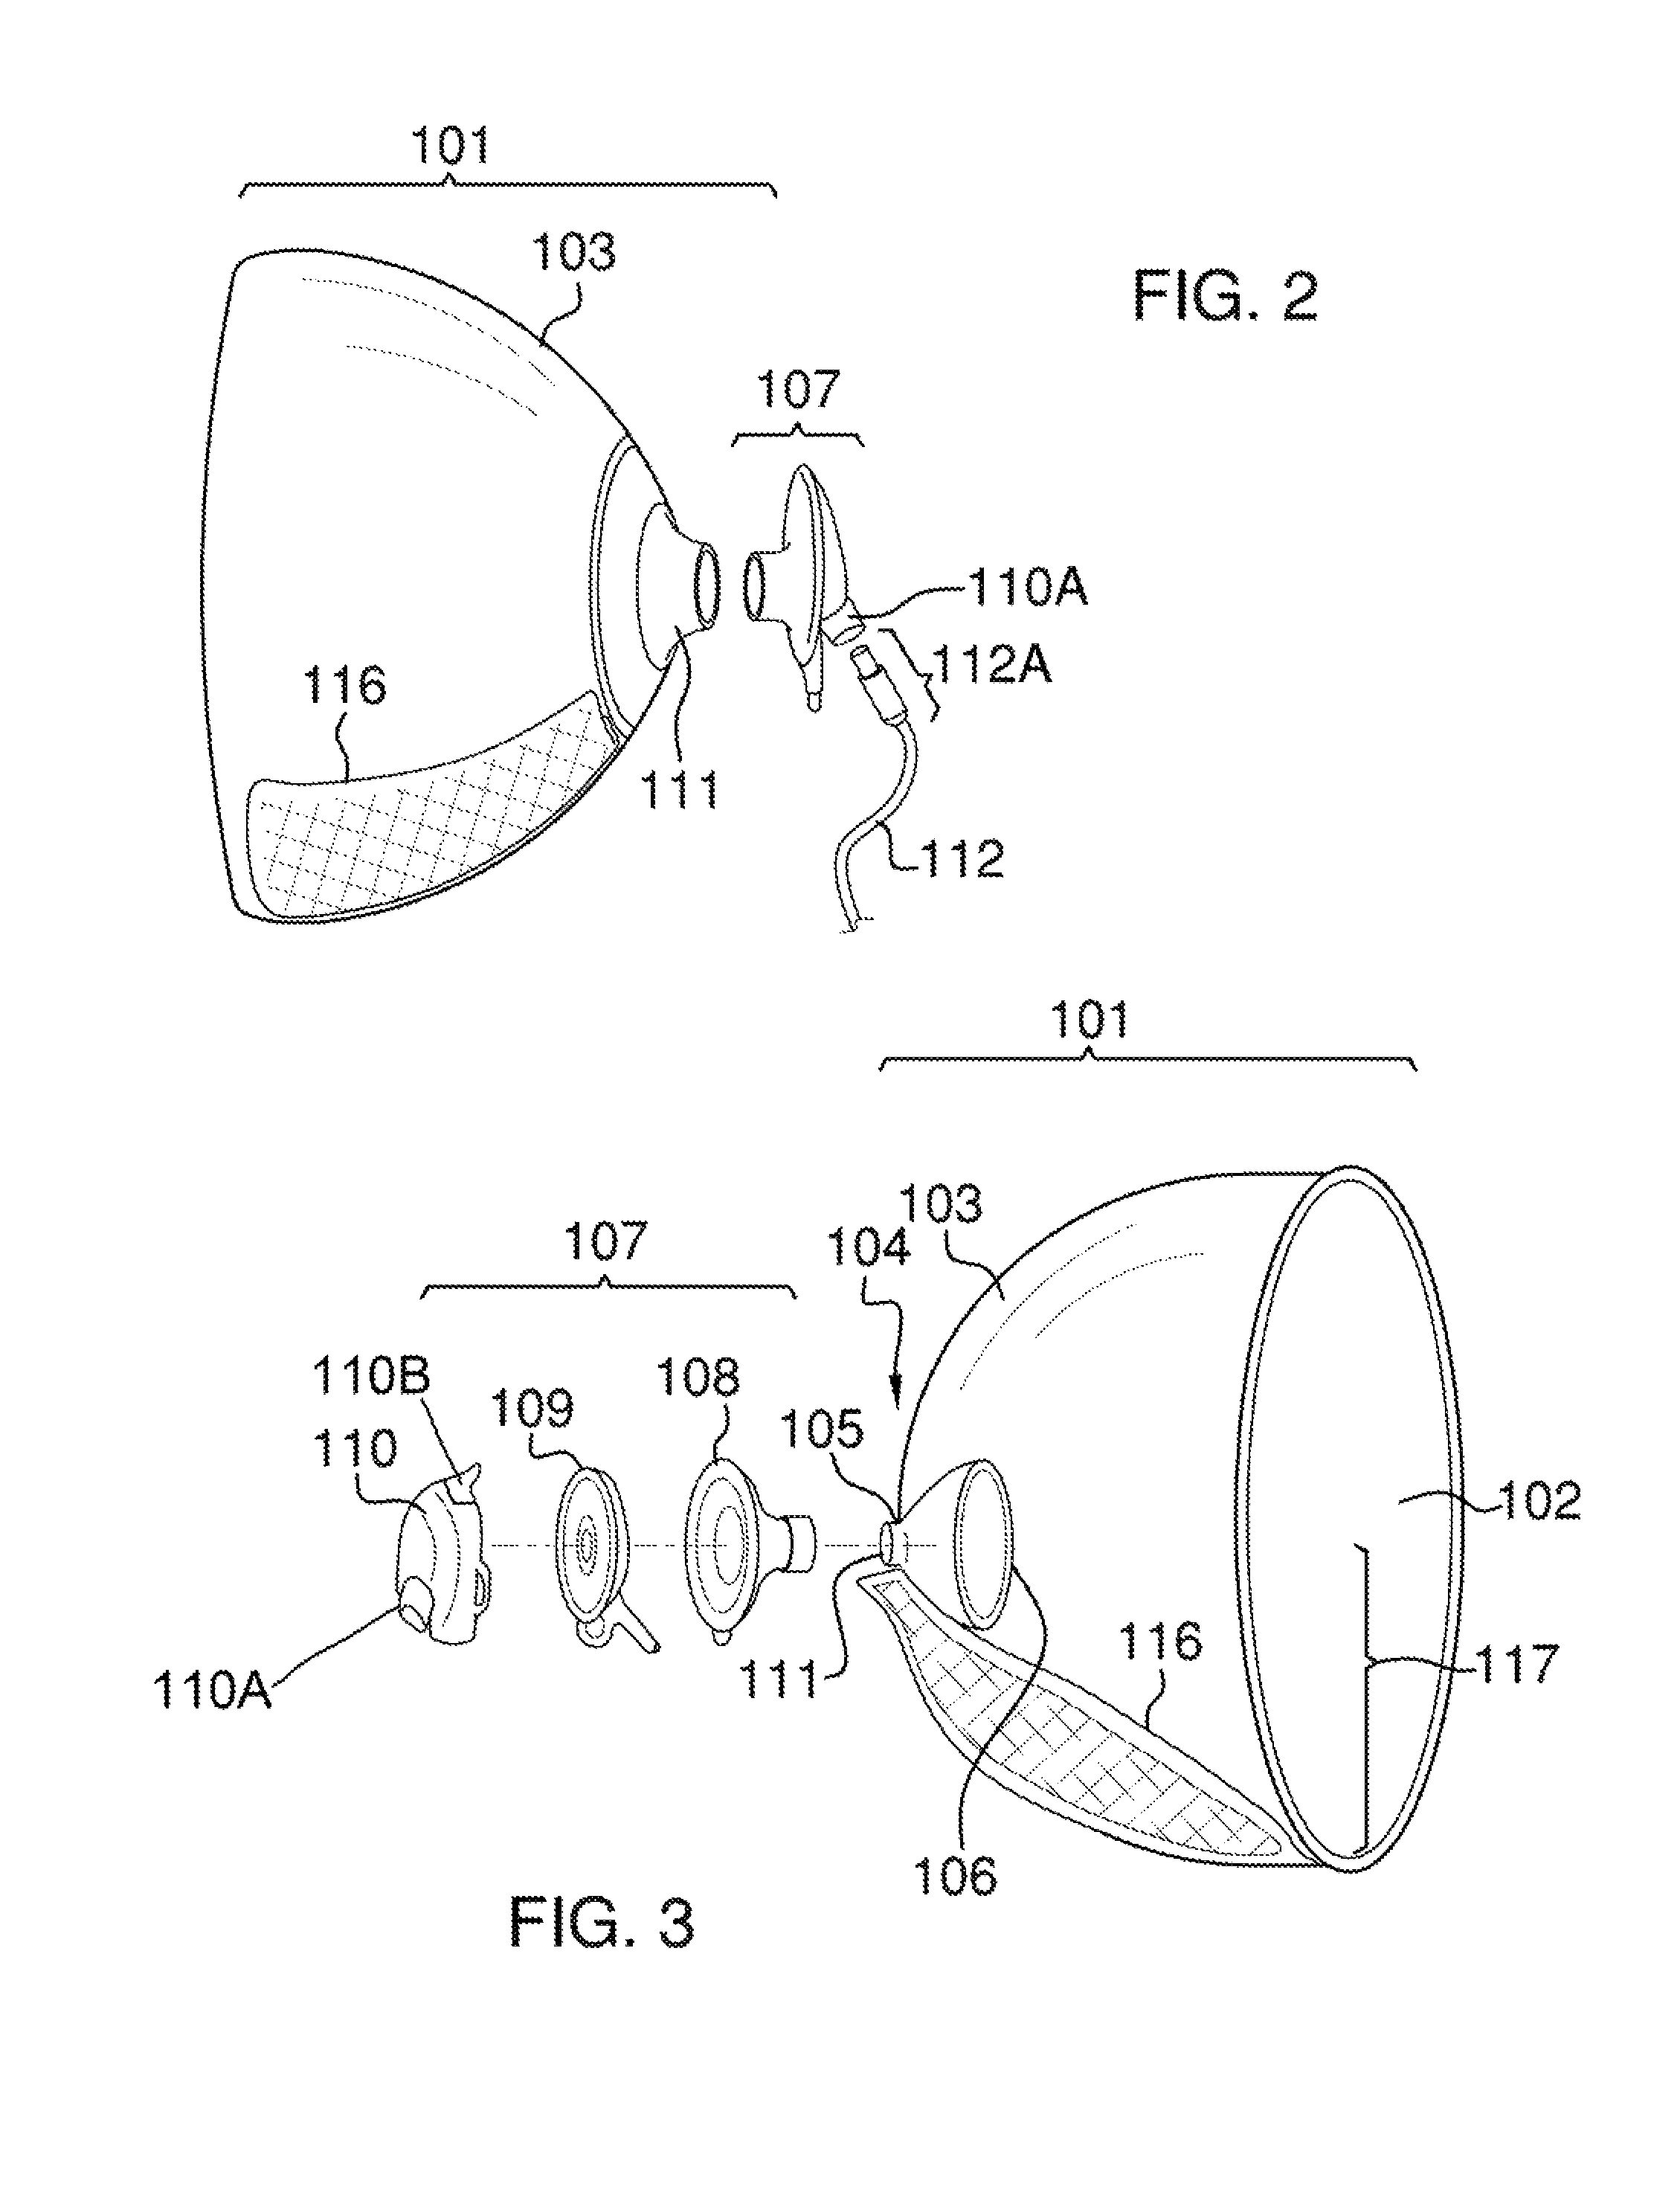 Bra with breast pumping apparatus integrated therein